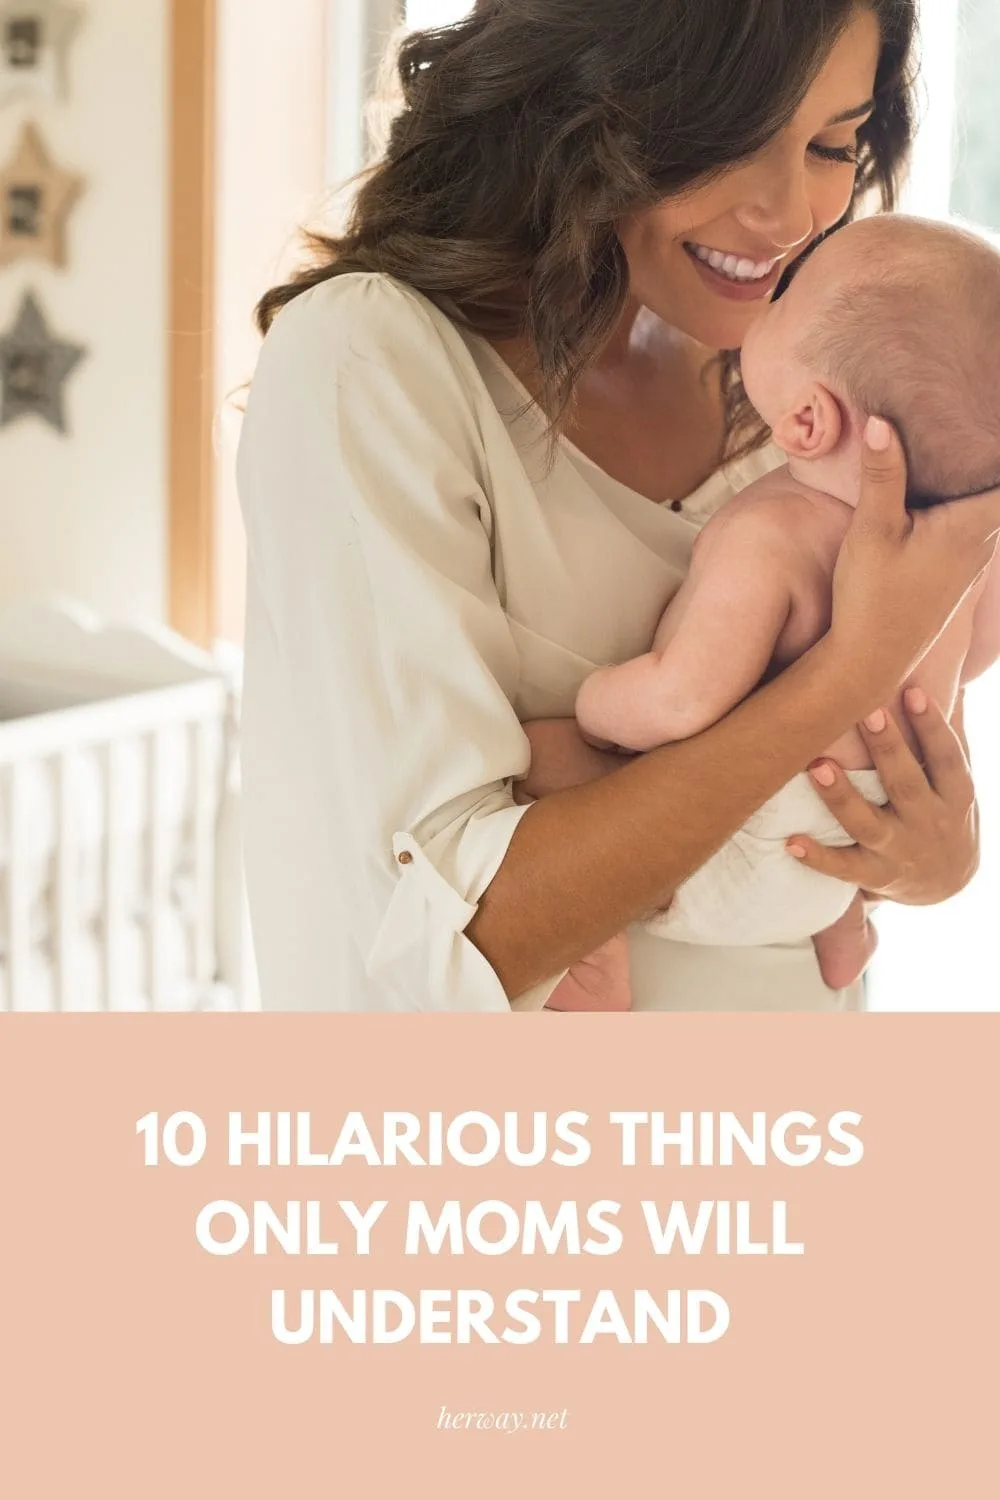 10 Hilarious Things Only Moms Will Understand